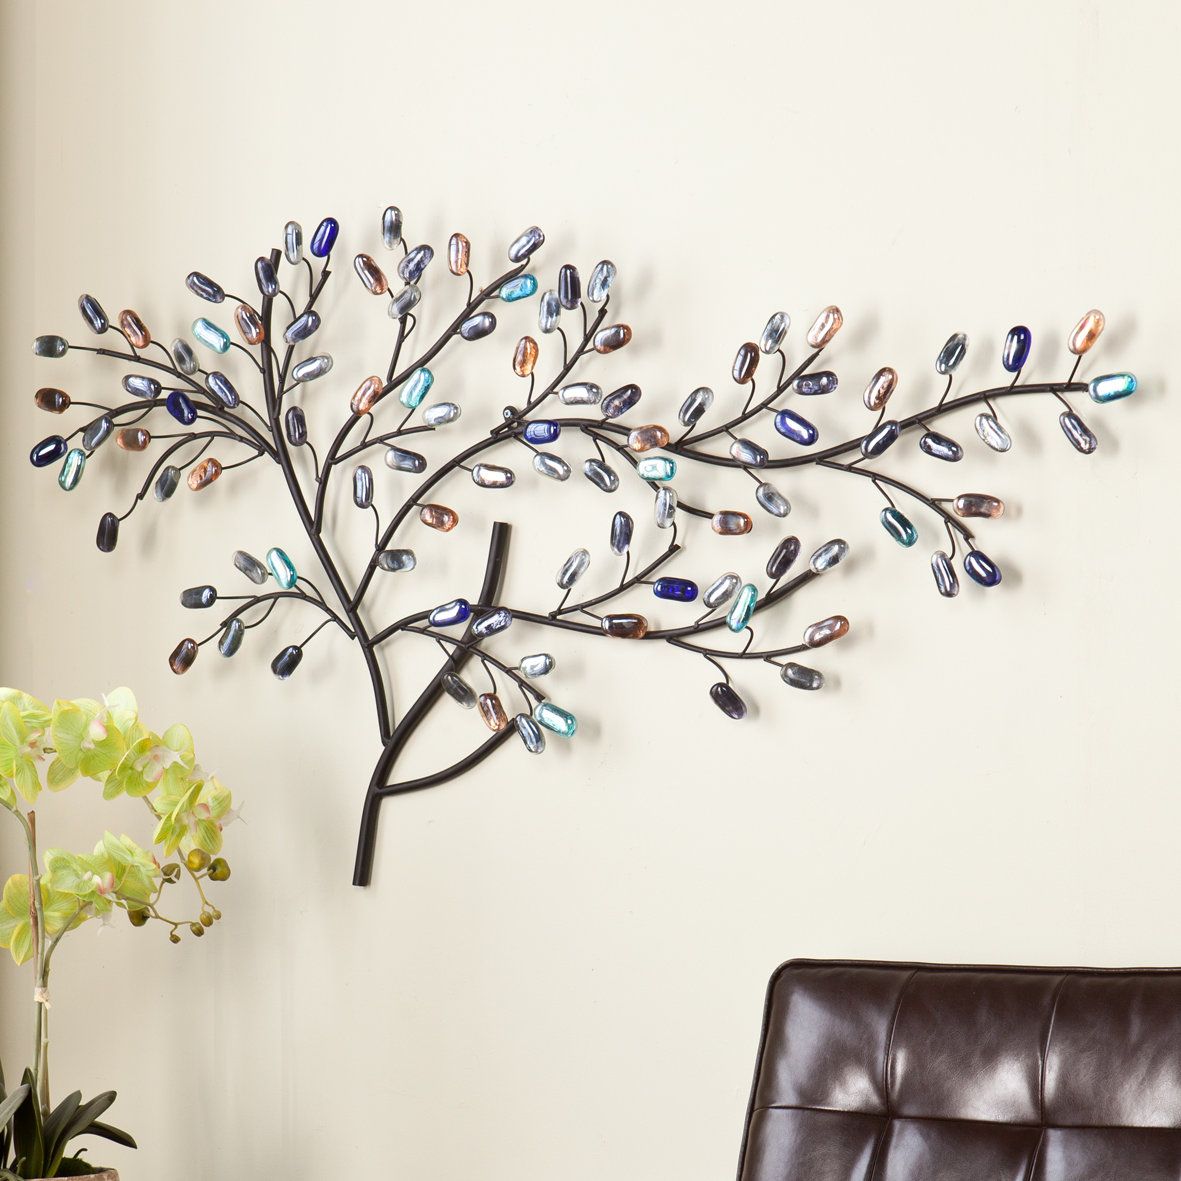 World Menagerie Windswept Tree Wall Décor & Reviews | Wayfair In Windswept Tree Wall Decor By World Menagerie (View 1 of 30)